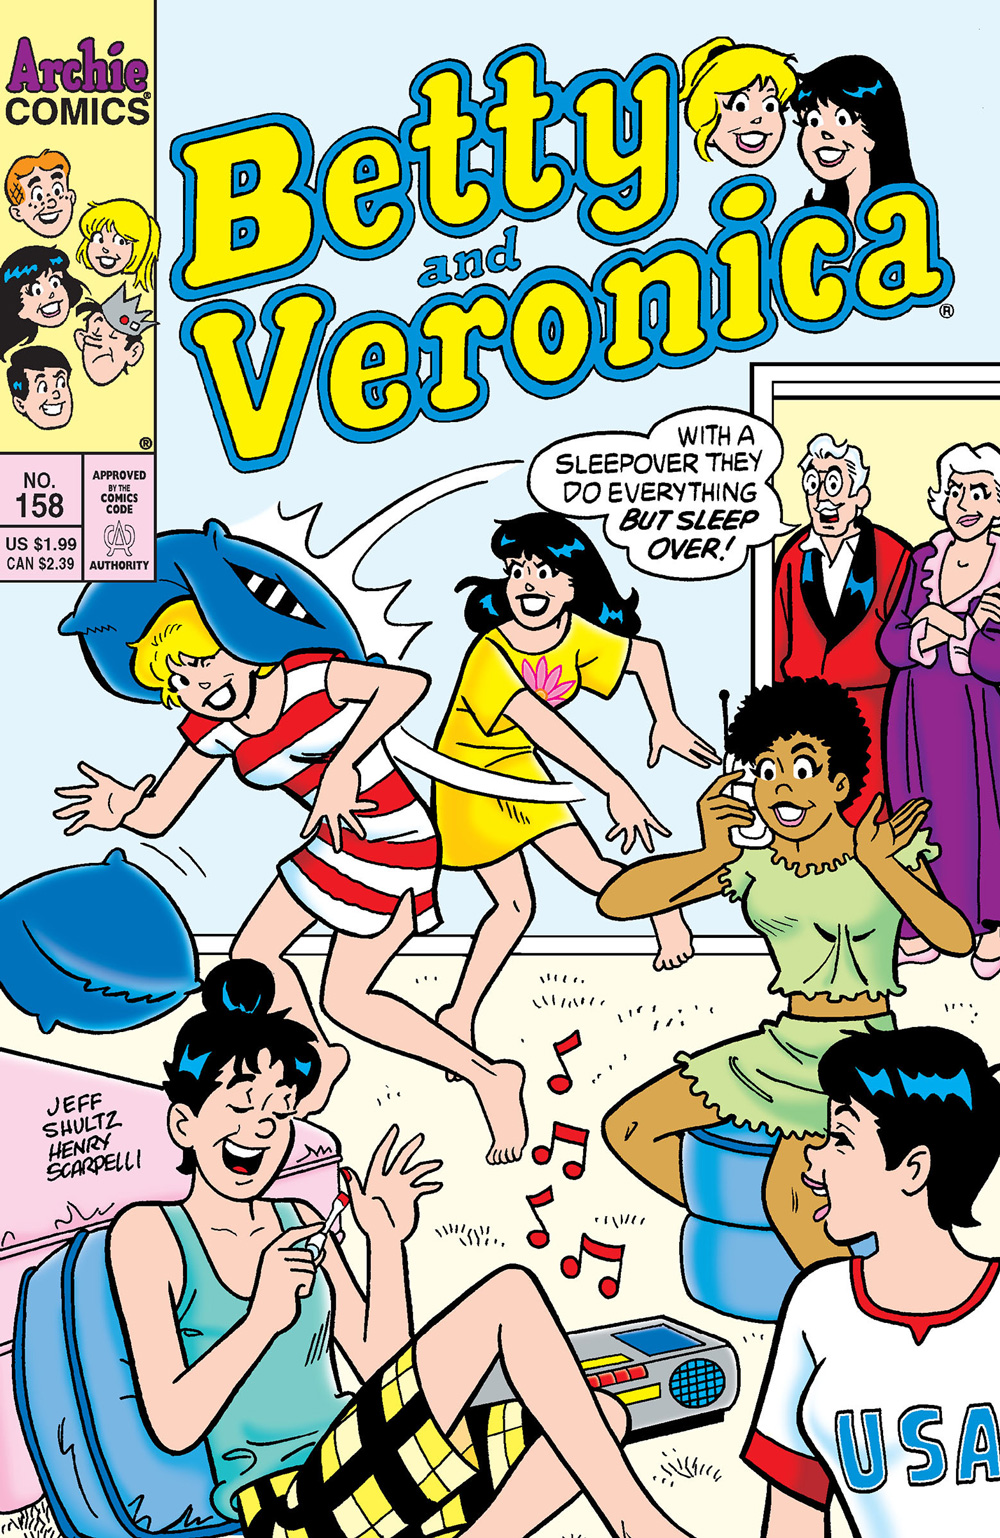 Betty, Veronica, Midge, and Nancy are at a sleepover party, talking on the phone, listening to music, doing manicures, and having a pillow fight. Veronica's parents look on with scowls on their faces, and her dad says they are doing everything but sleeping.